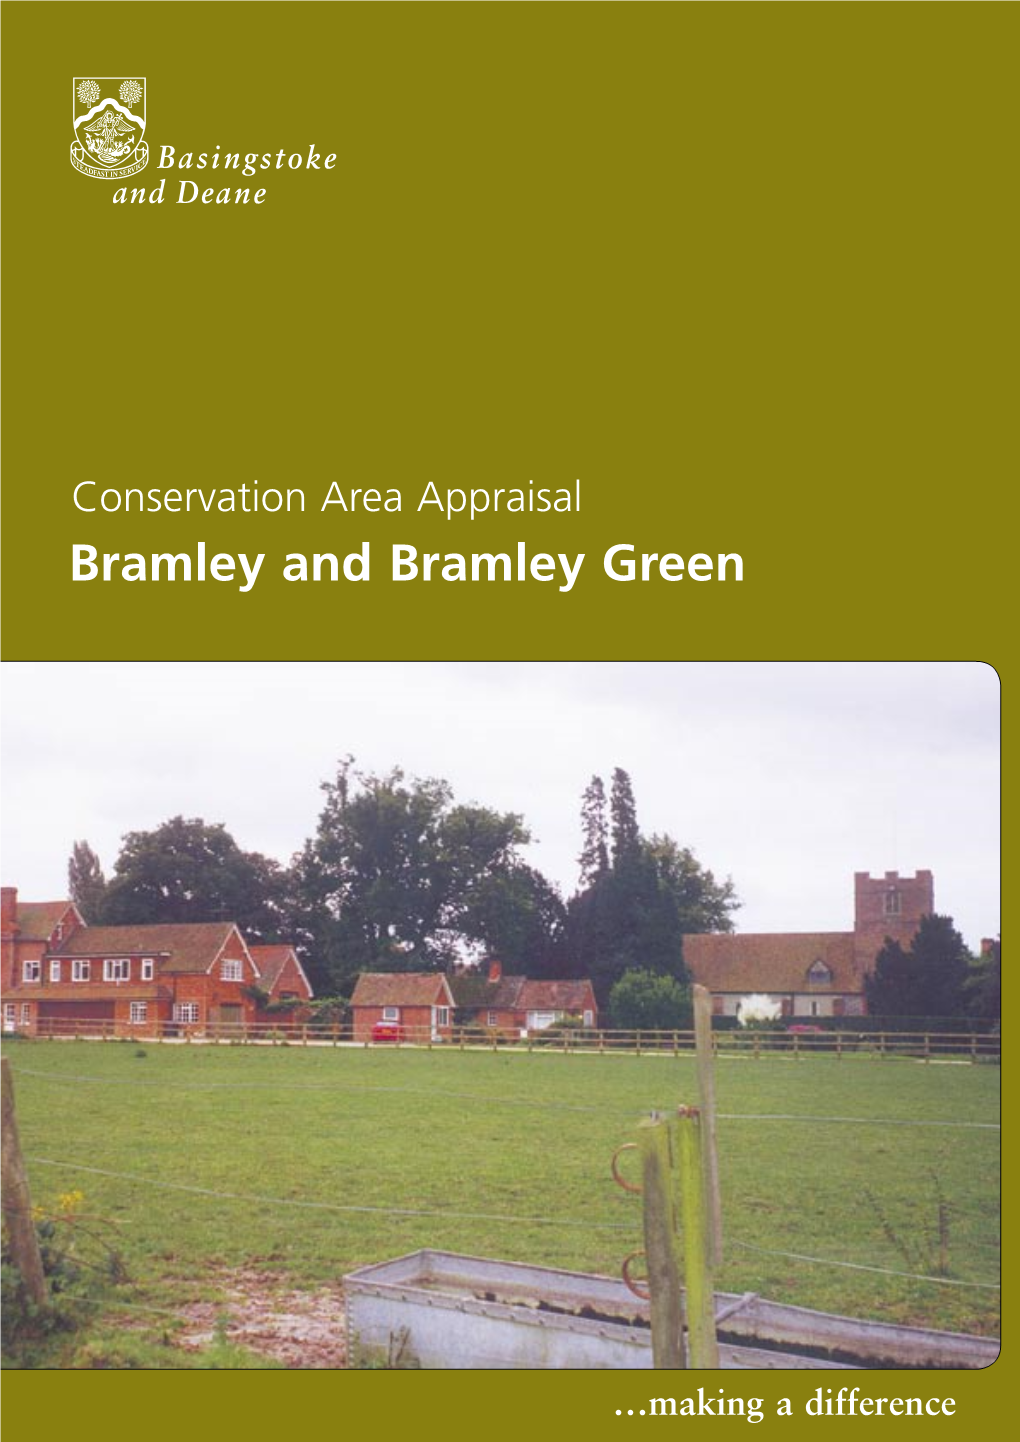 Bramley and Bramley Green Conservation Area